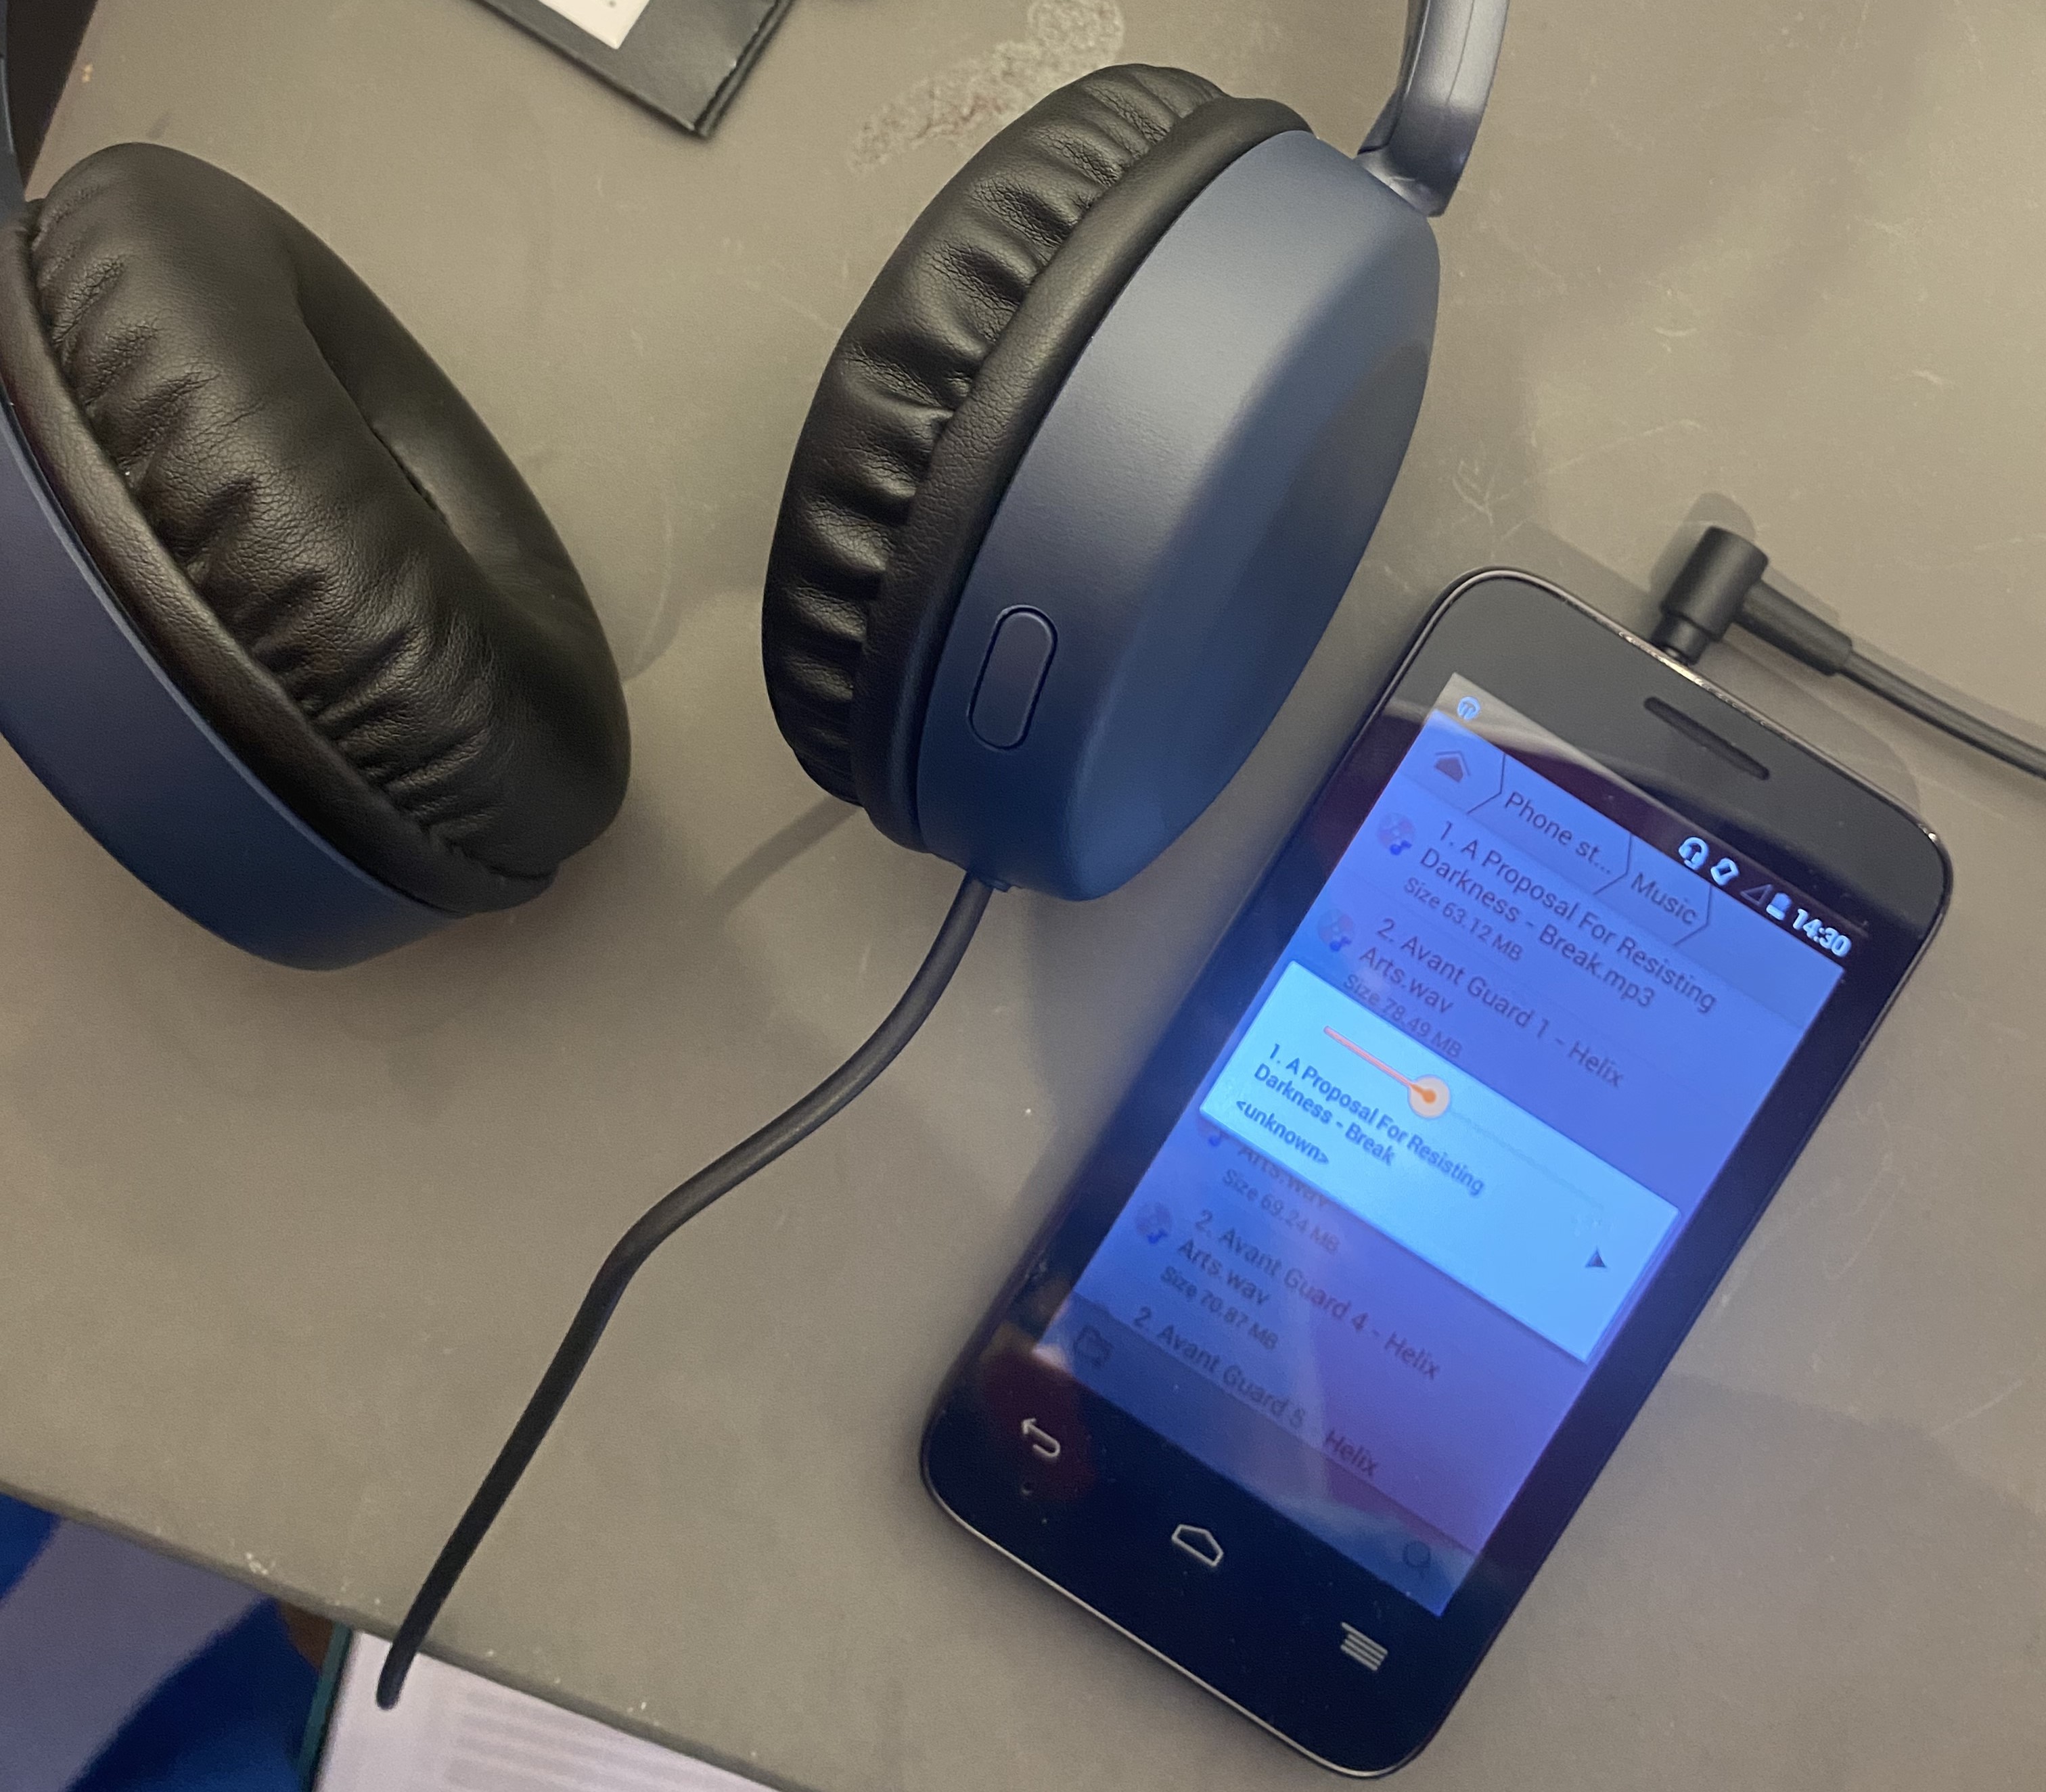 An MP3 player is shown on a grey surface, alongside grey headphones, with an audio file playing titled 'A Proposal for Resisting Darkness'